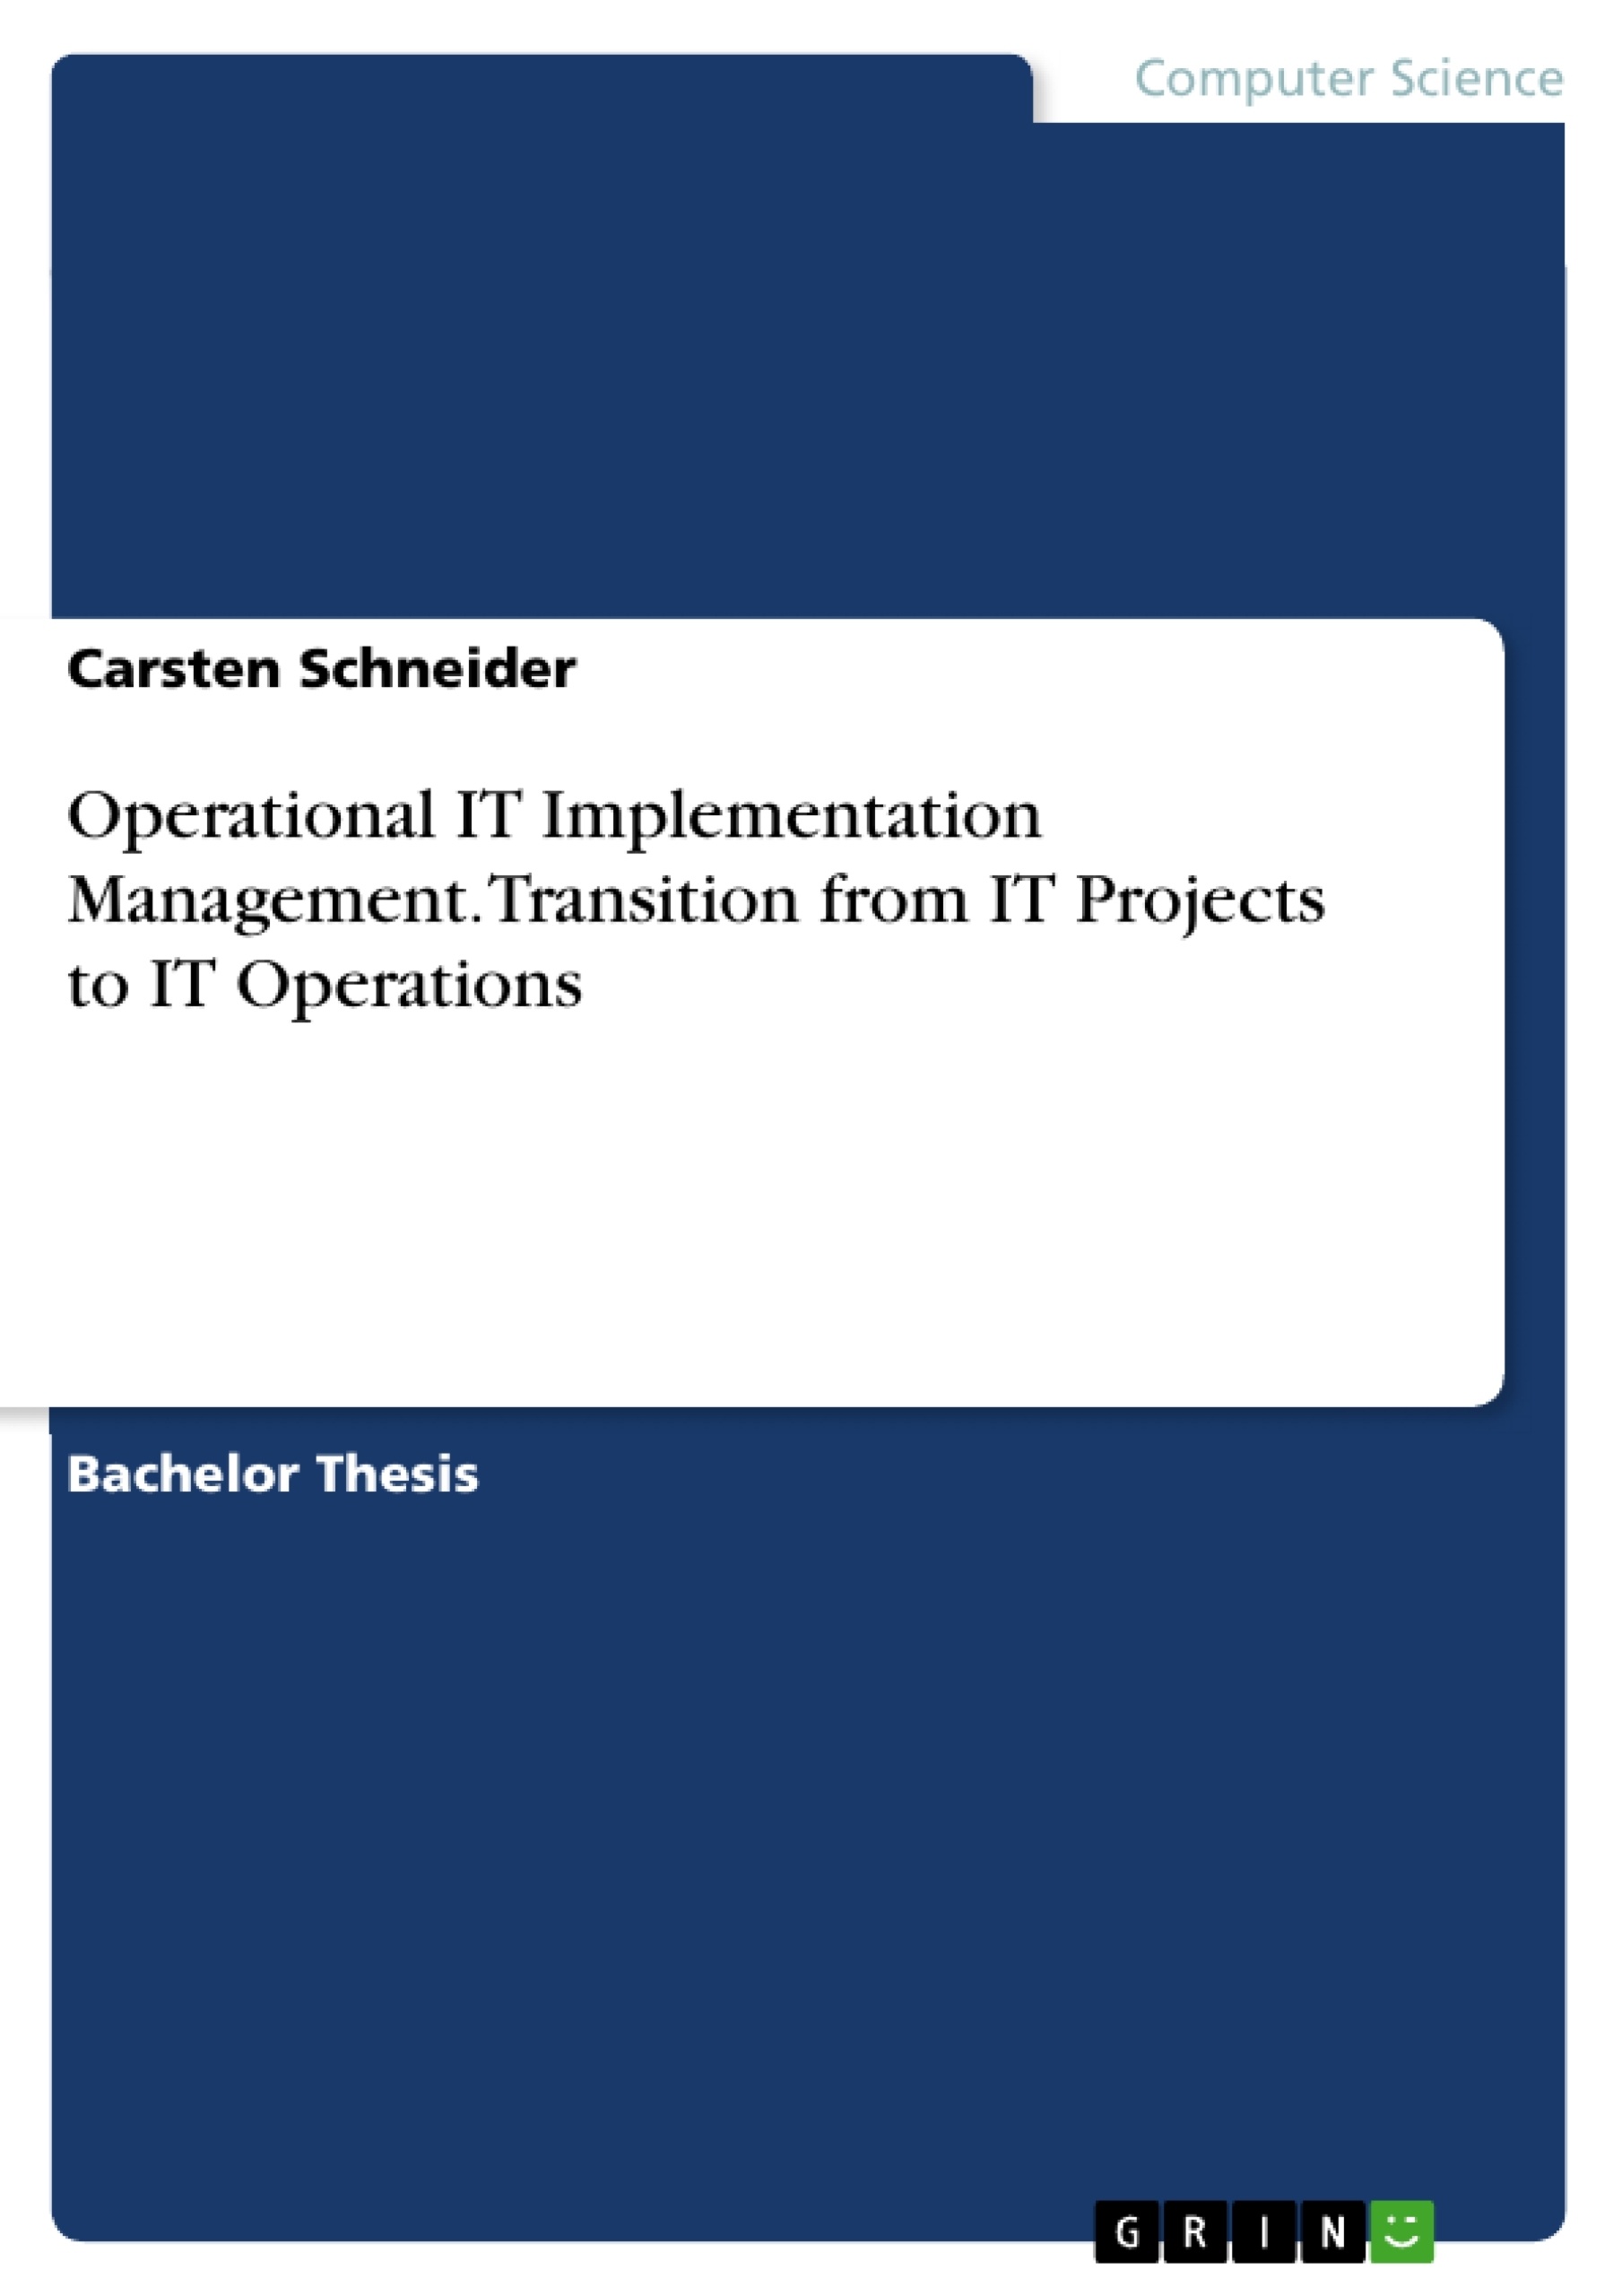 Title: Operational IT Implementation Management. Transition from IT Projects to IT Operations